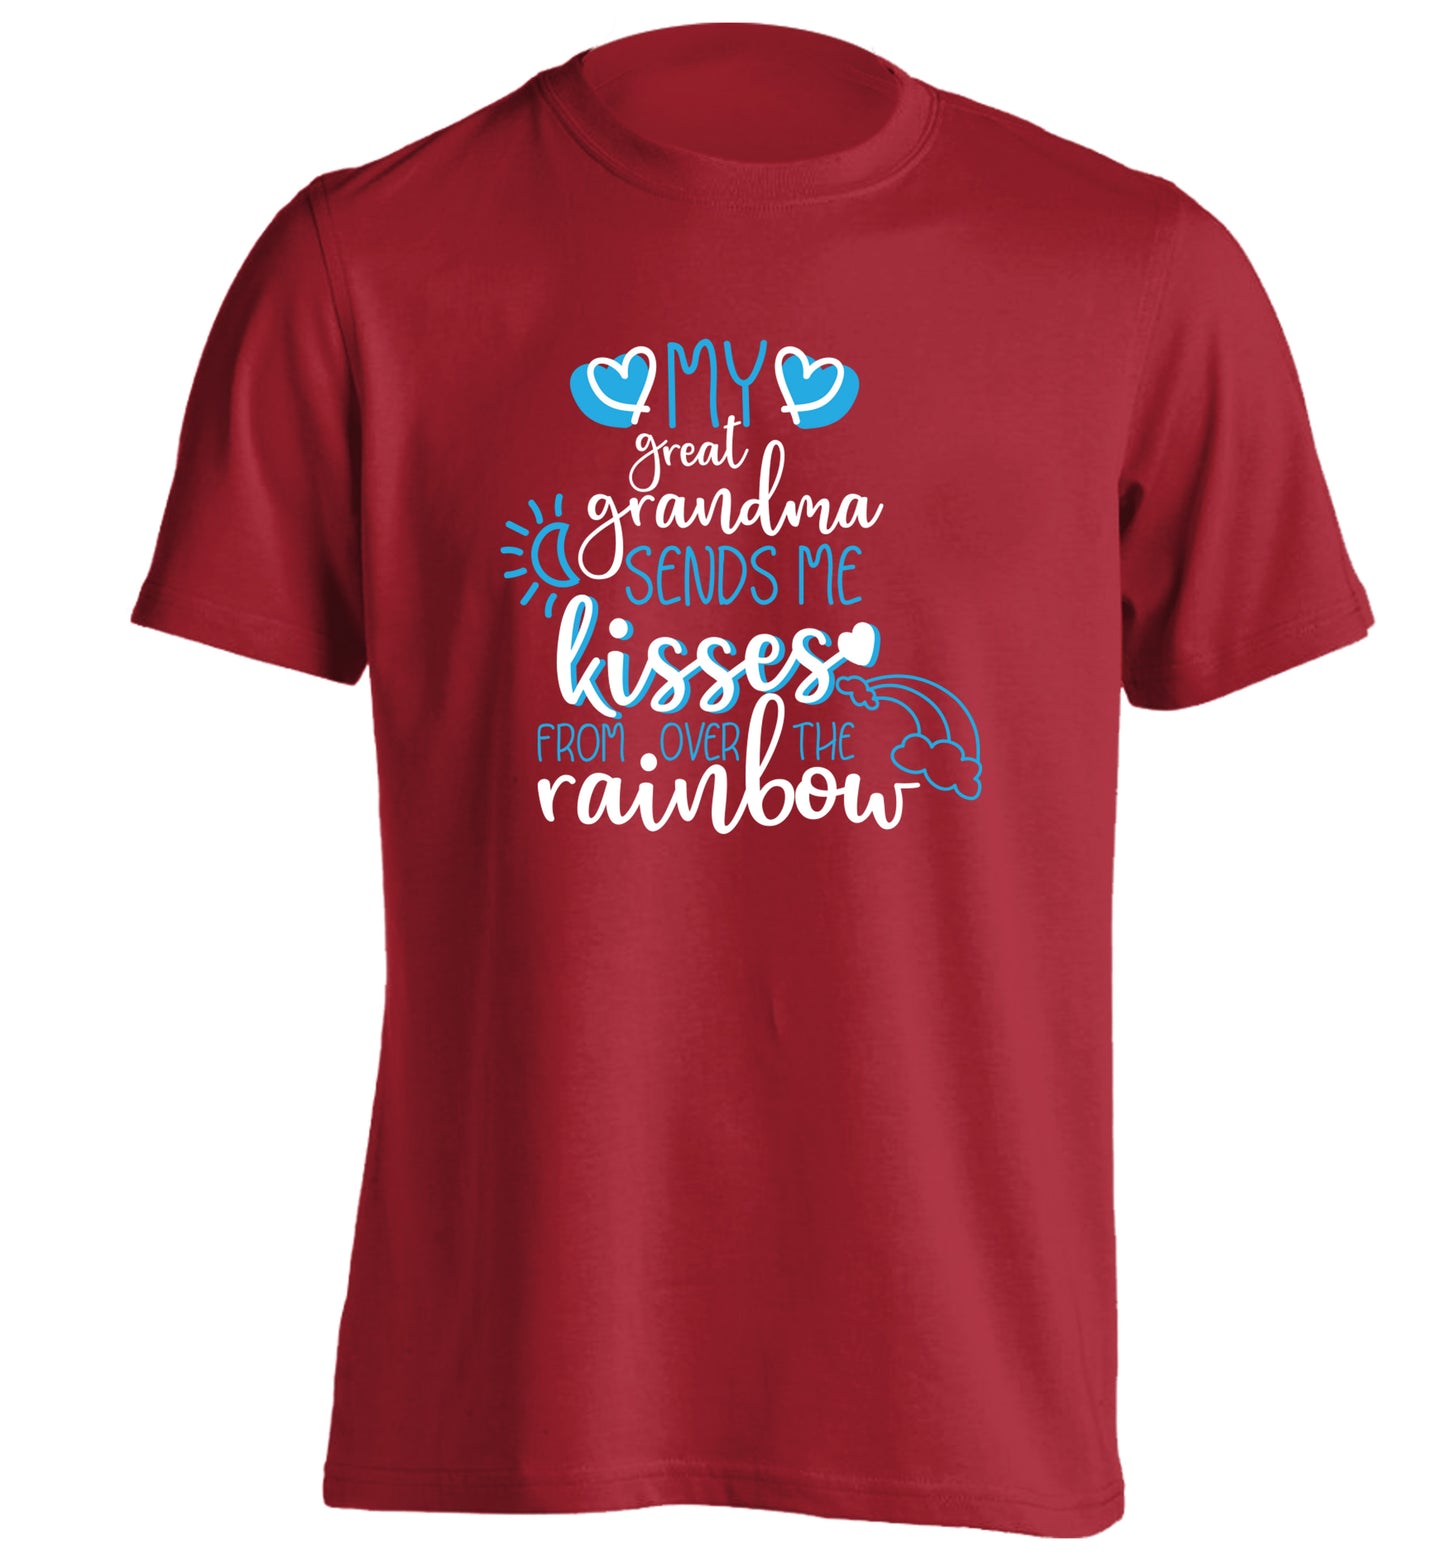 My great grandma sends me kisses from over the rainbow adults unisex red Tshirt 2XL